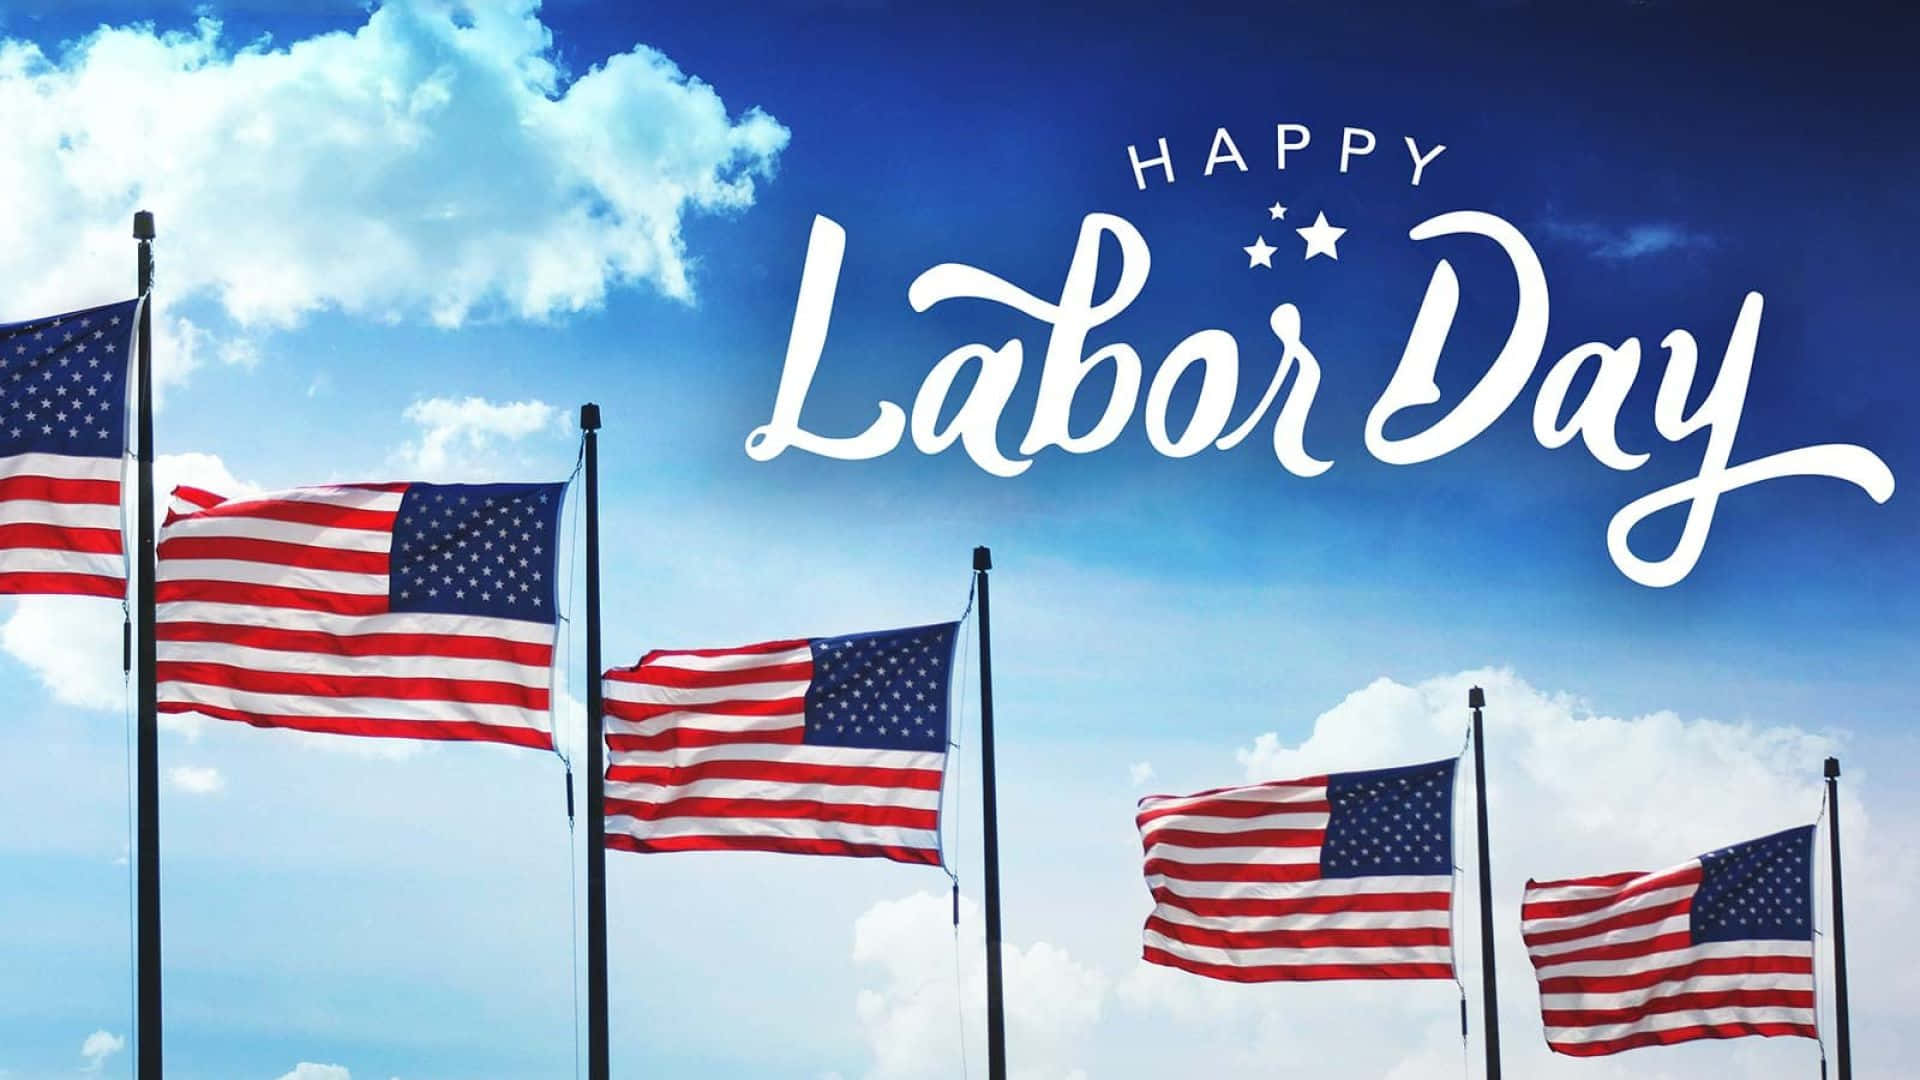 "Happy Labor Day! Let's celebrate all the hard work that makes life possible!"